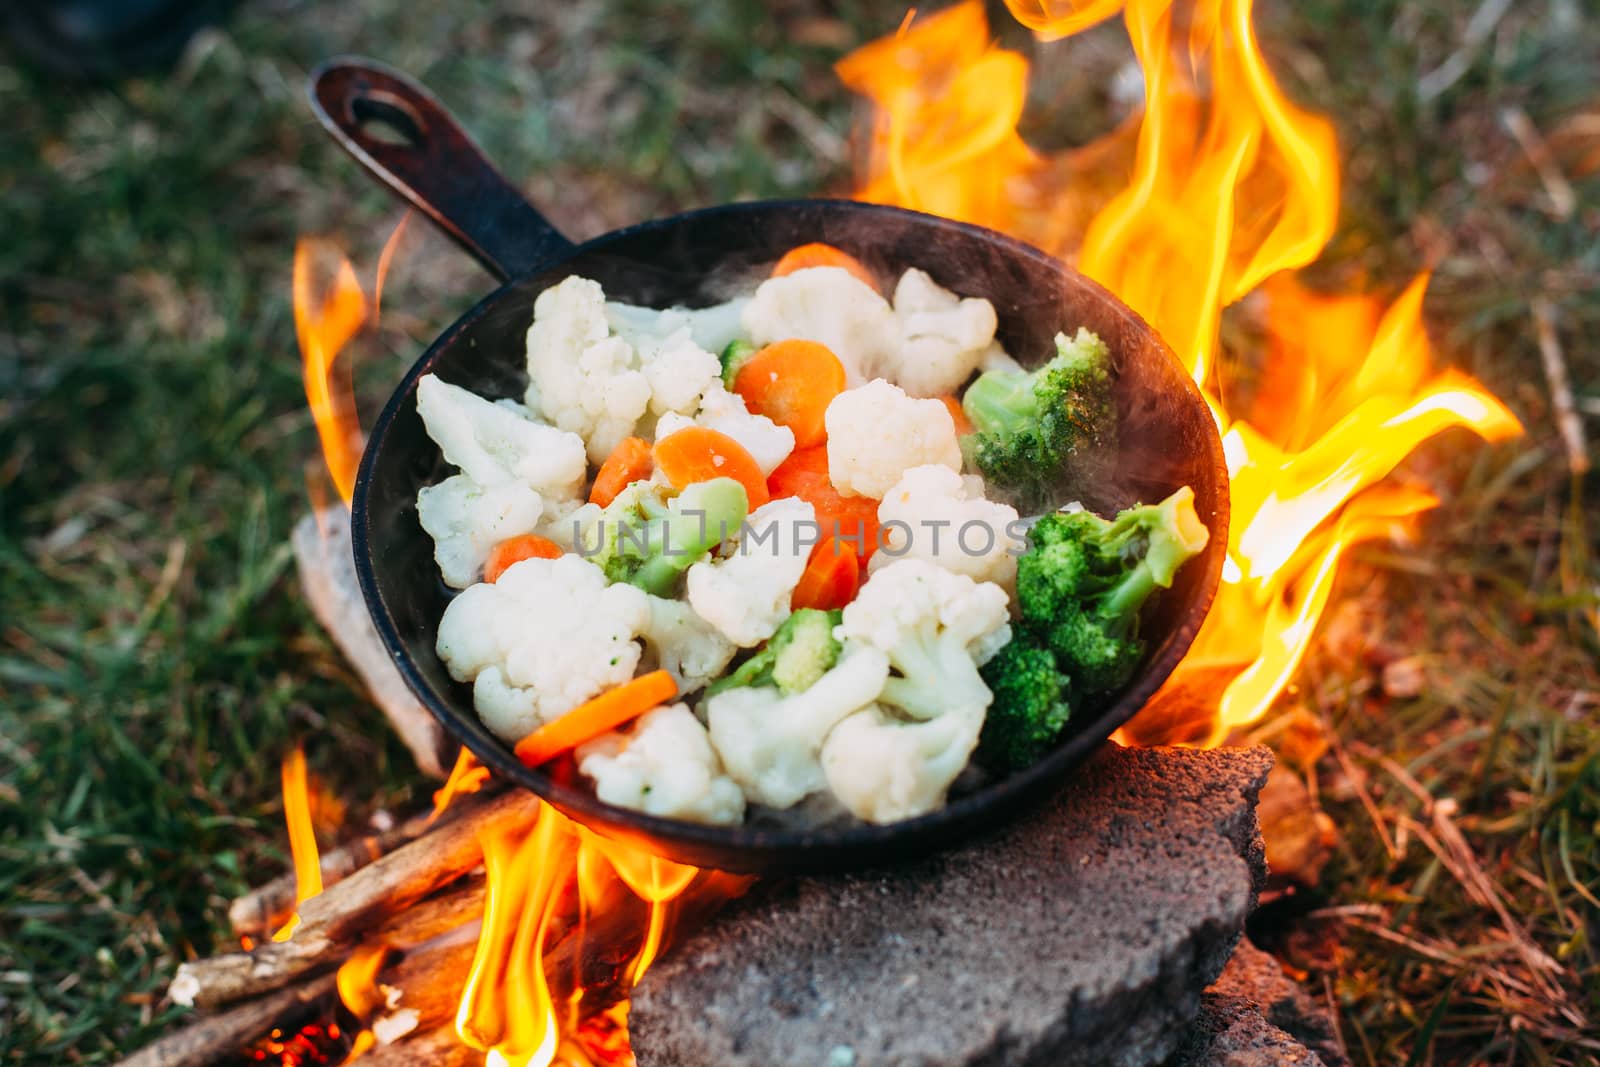 Cauliflower, broccoli and carrot in a pan. Cooking on an open fire. Outdoor food. Grilled vegetables. Food on a camping trip